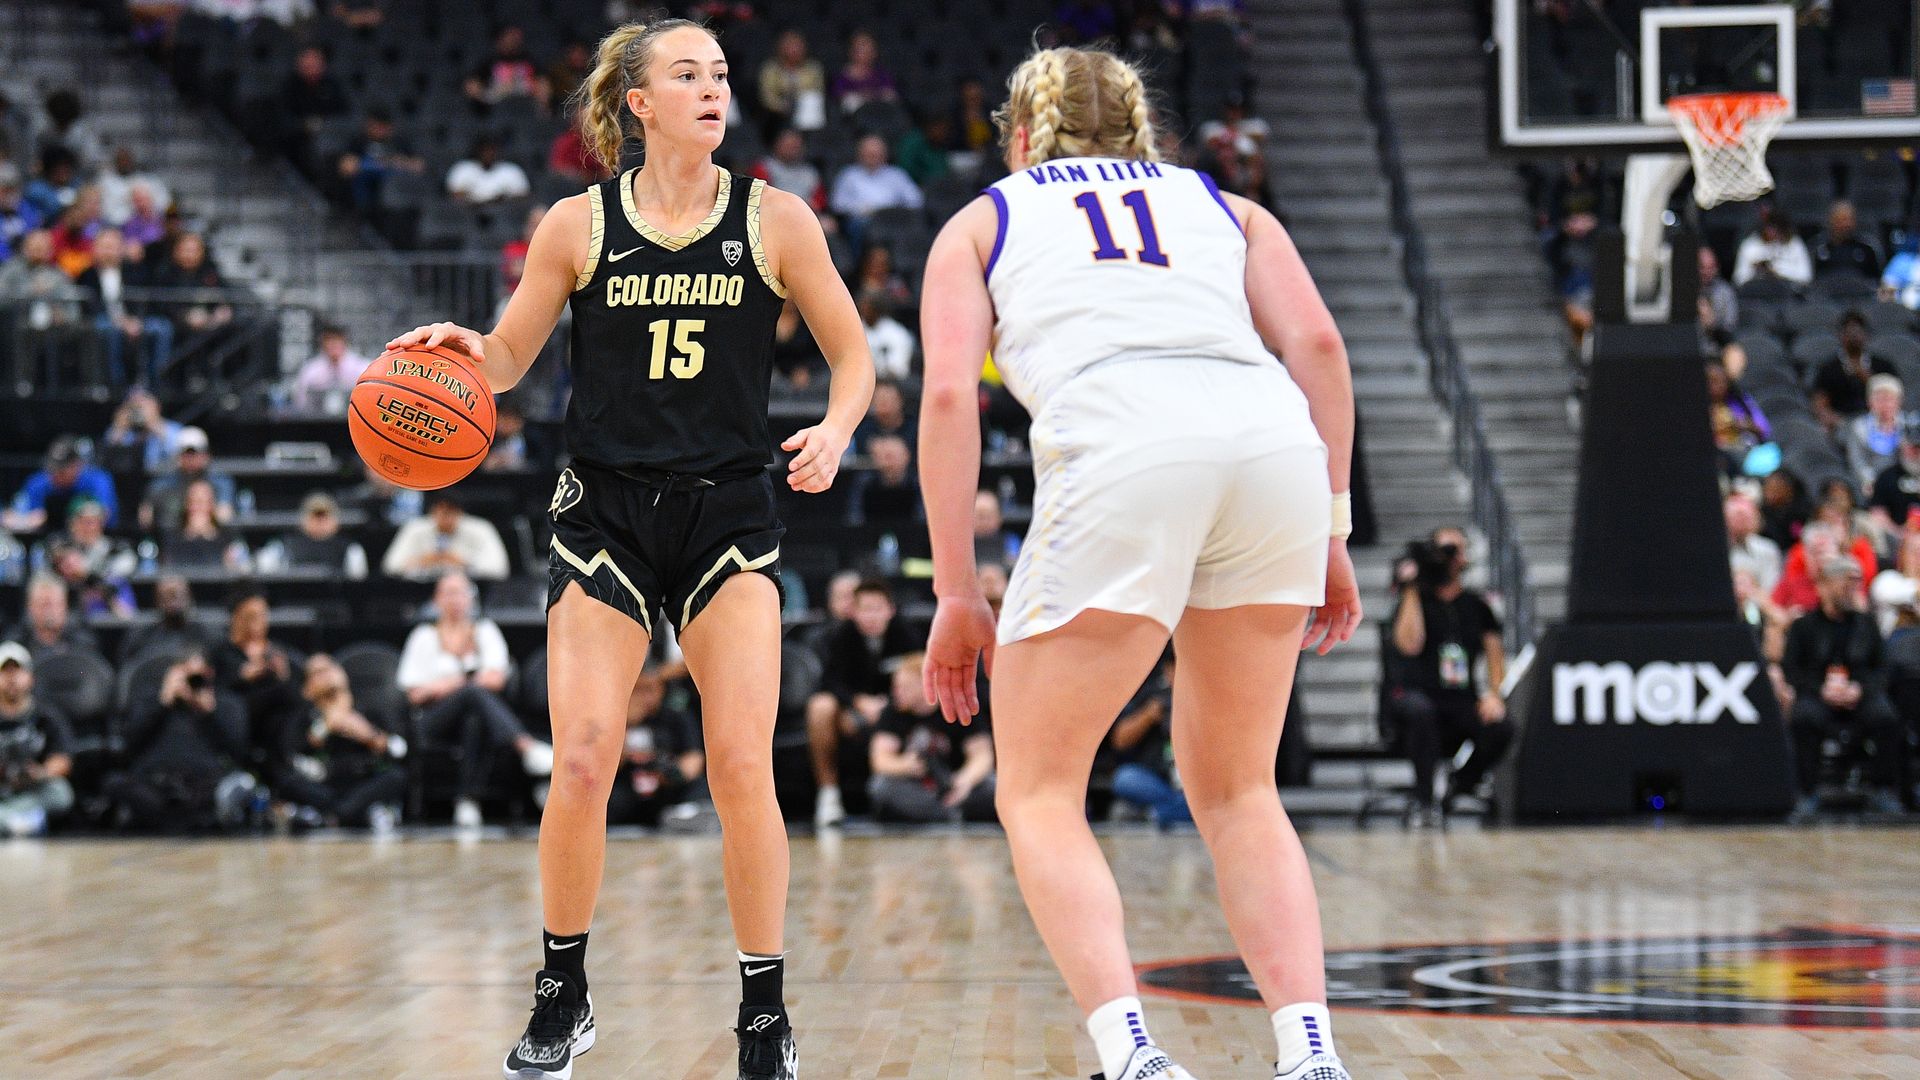 Colorado Buffaloes guard Kindyll Wetta (15) dribbles up the court during the Hall of Fame Series, a women's college basketball game between the LSU Tigers and the Colorado Buffaloes on November 6, 2023 at T-Mobile Arena in Las Vegas, NV.